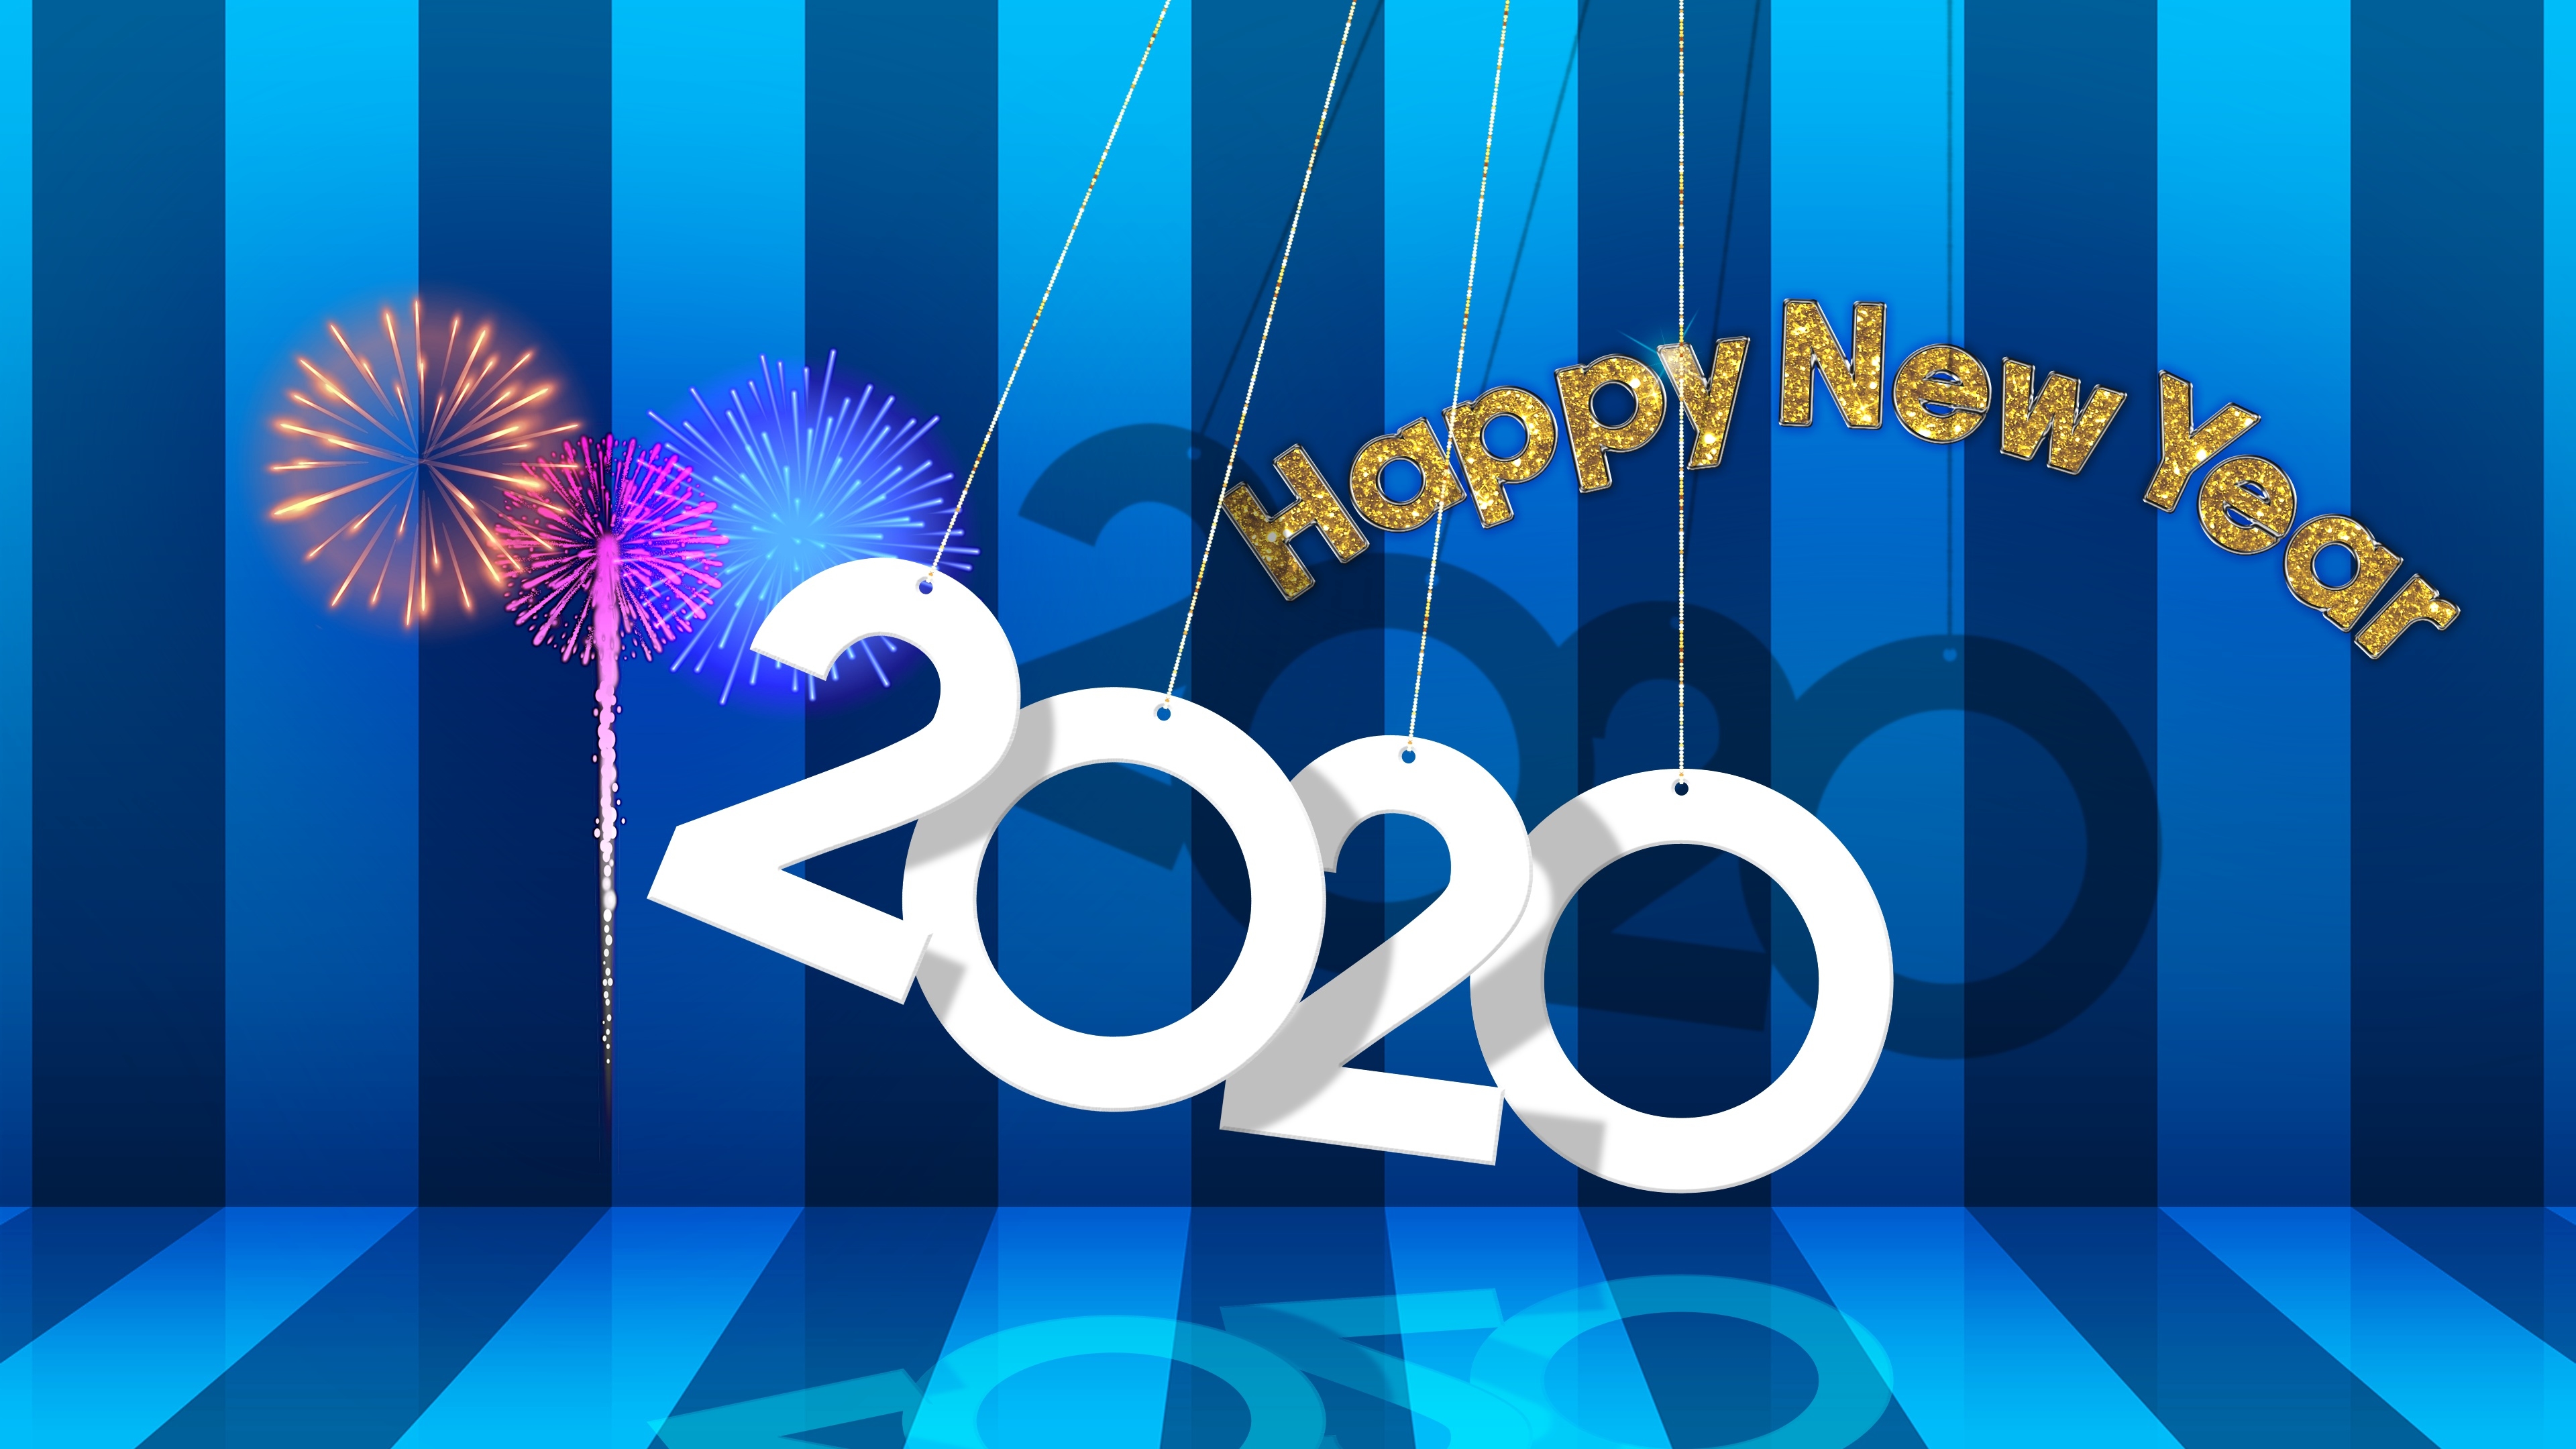 Windows 10 Happy New Year 2020 Wallpapers Wallpaper Cave